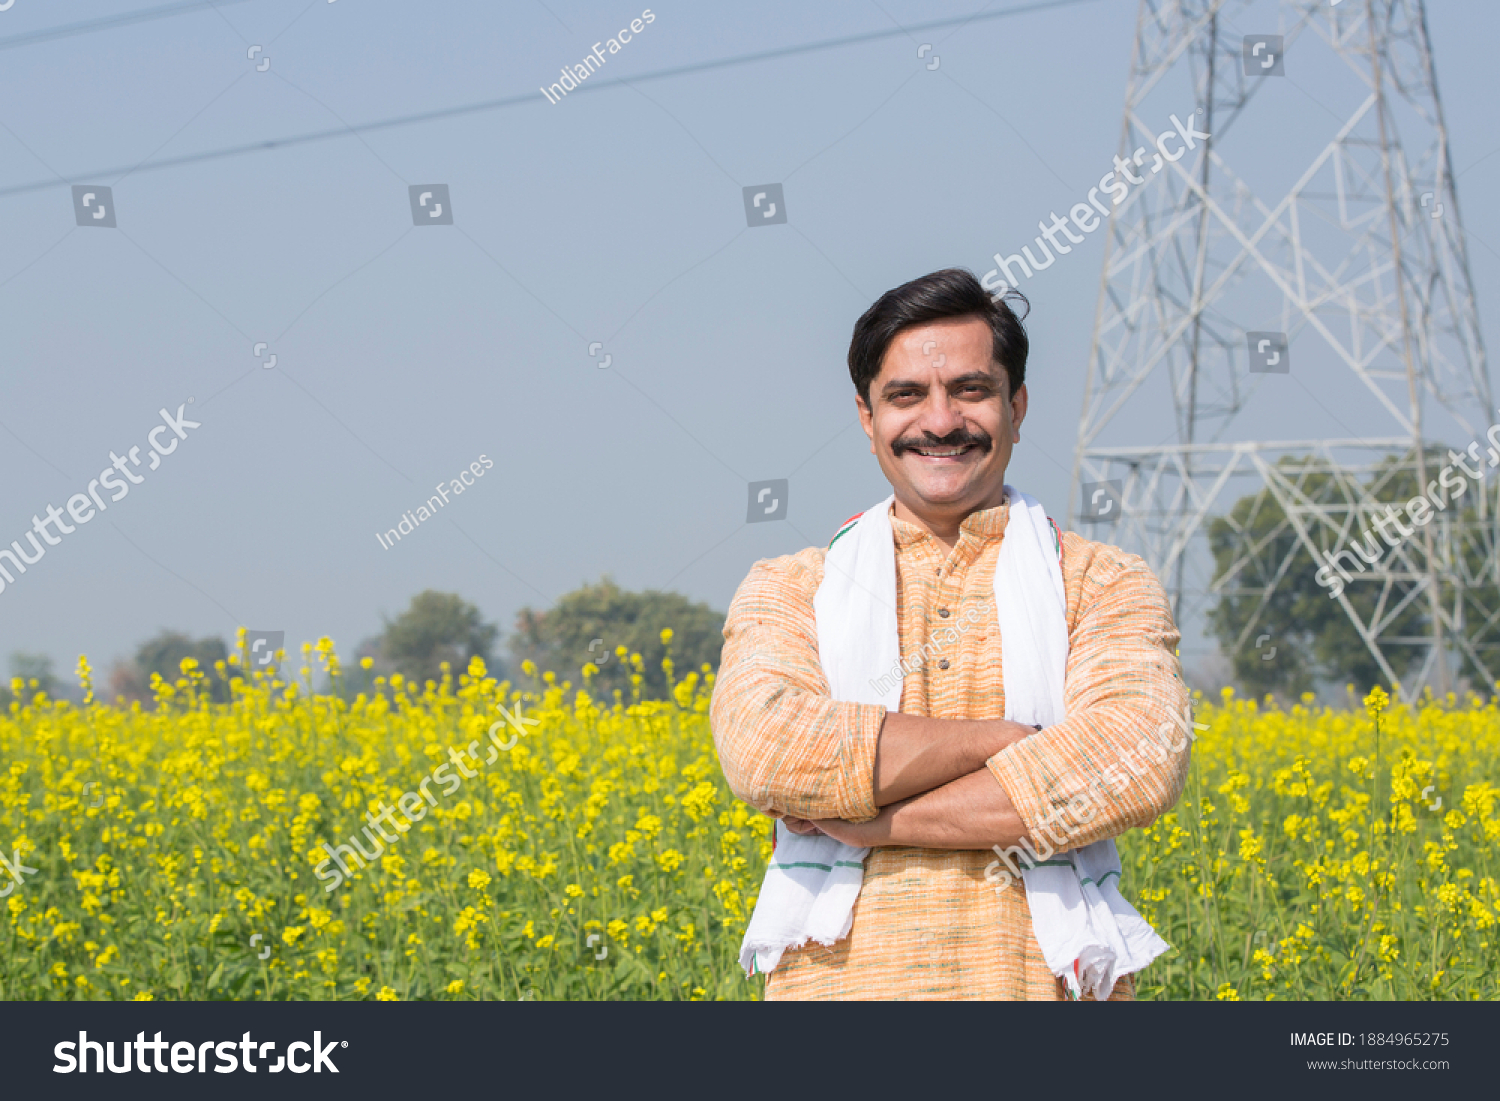 Indian farmer standing in agricultural field #1884965275